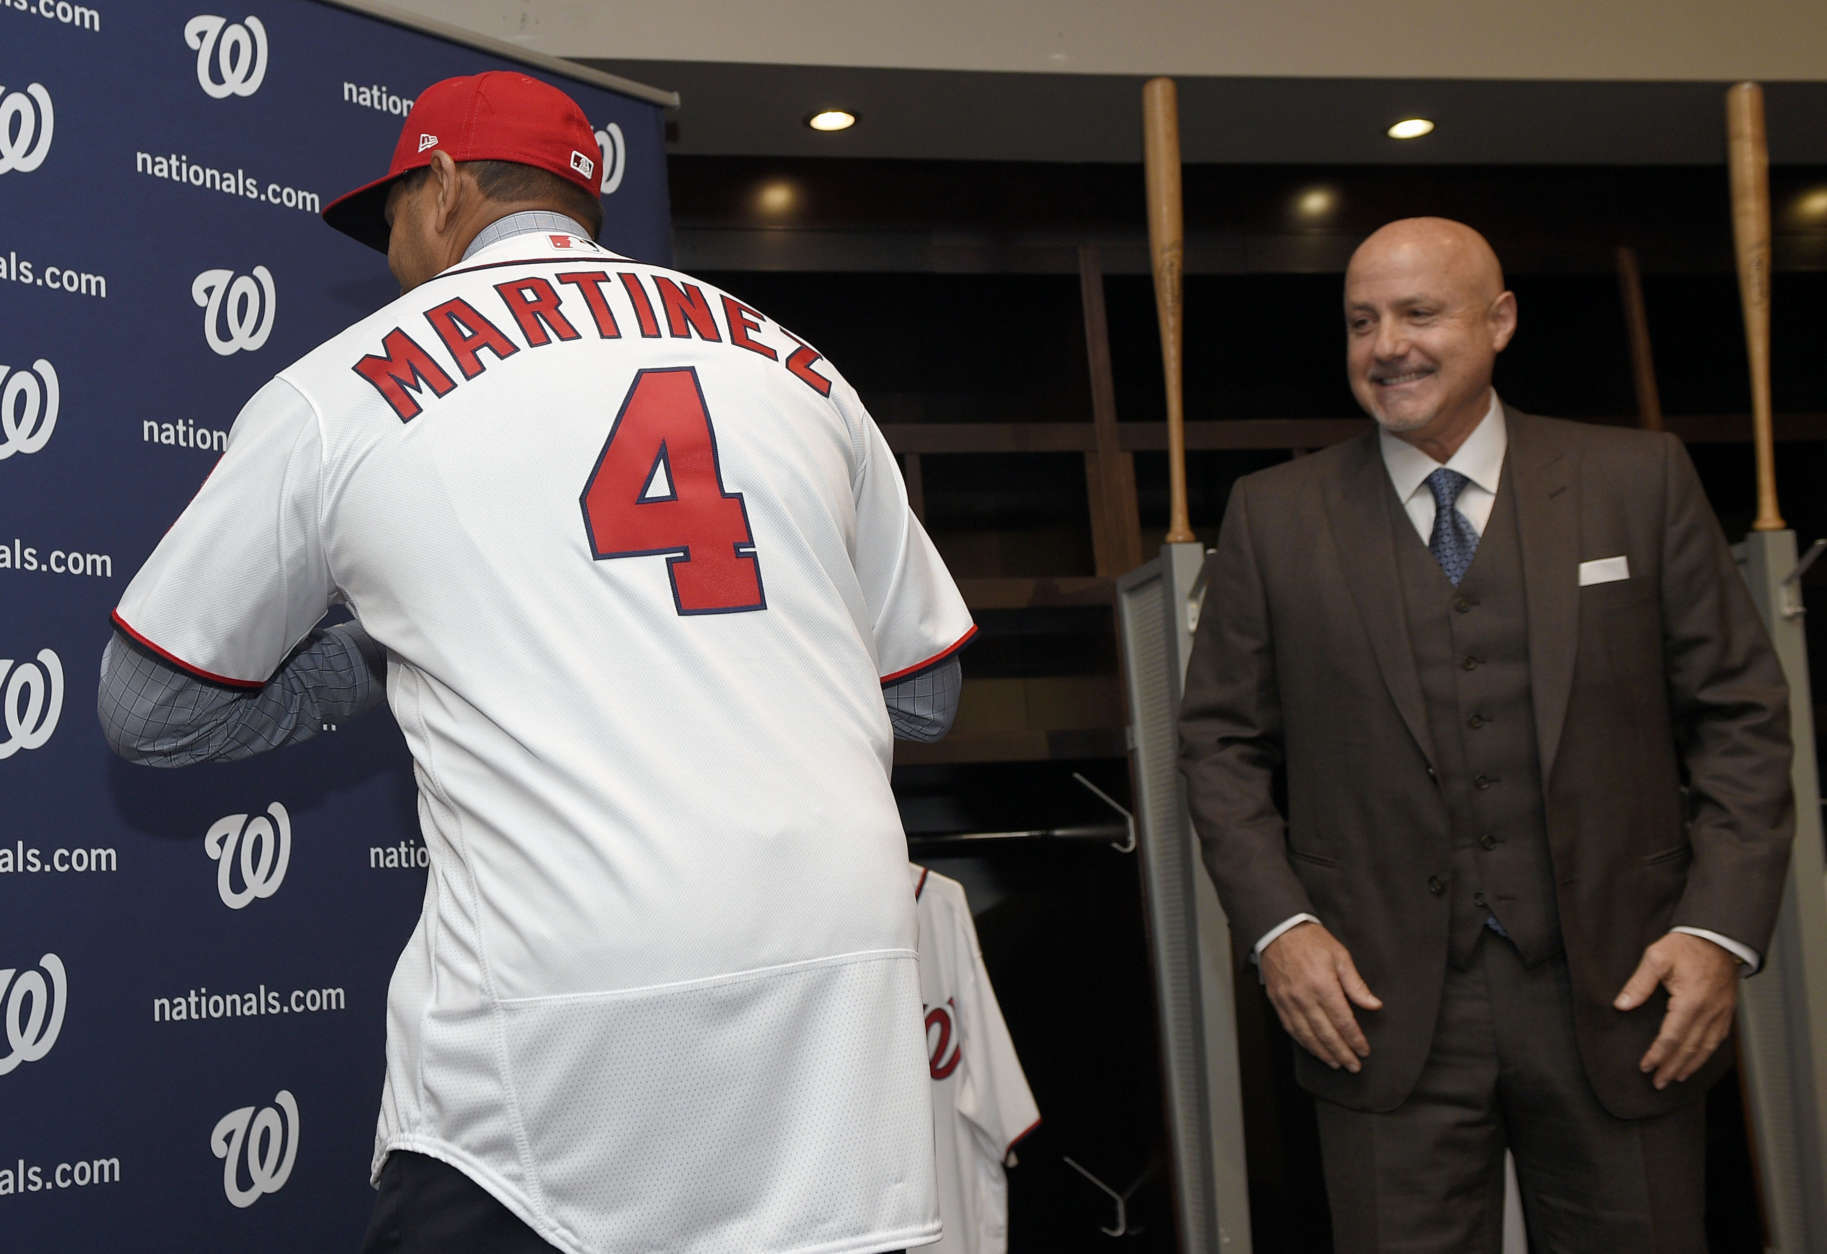 Washington Nationals new manager Dave Martinez, left, shows off his jersey as general manager Mike Rizzo, right, watches during a baseball press conference, Thursday, Nov. 2, 2017, in Washington. (AP Photo/Nick Wass)